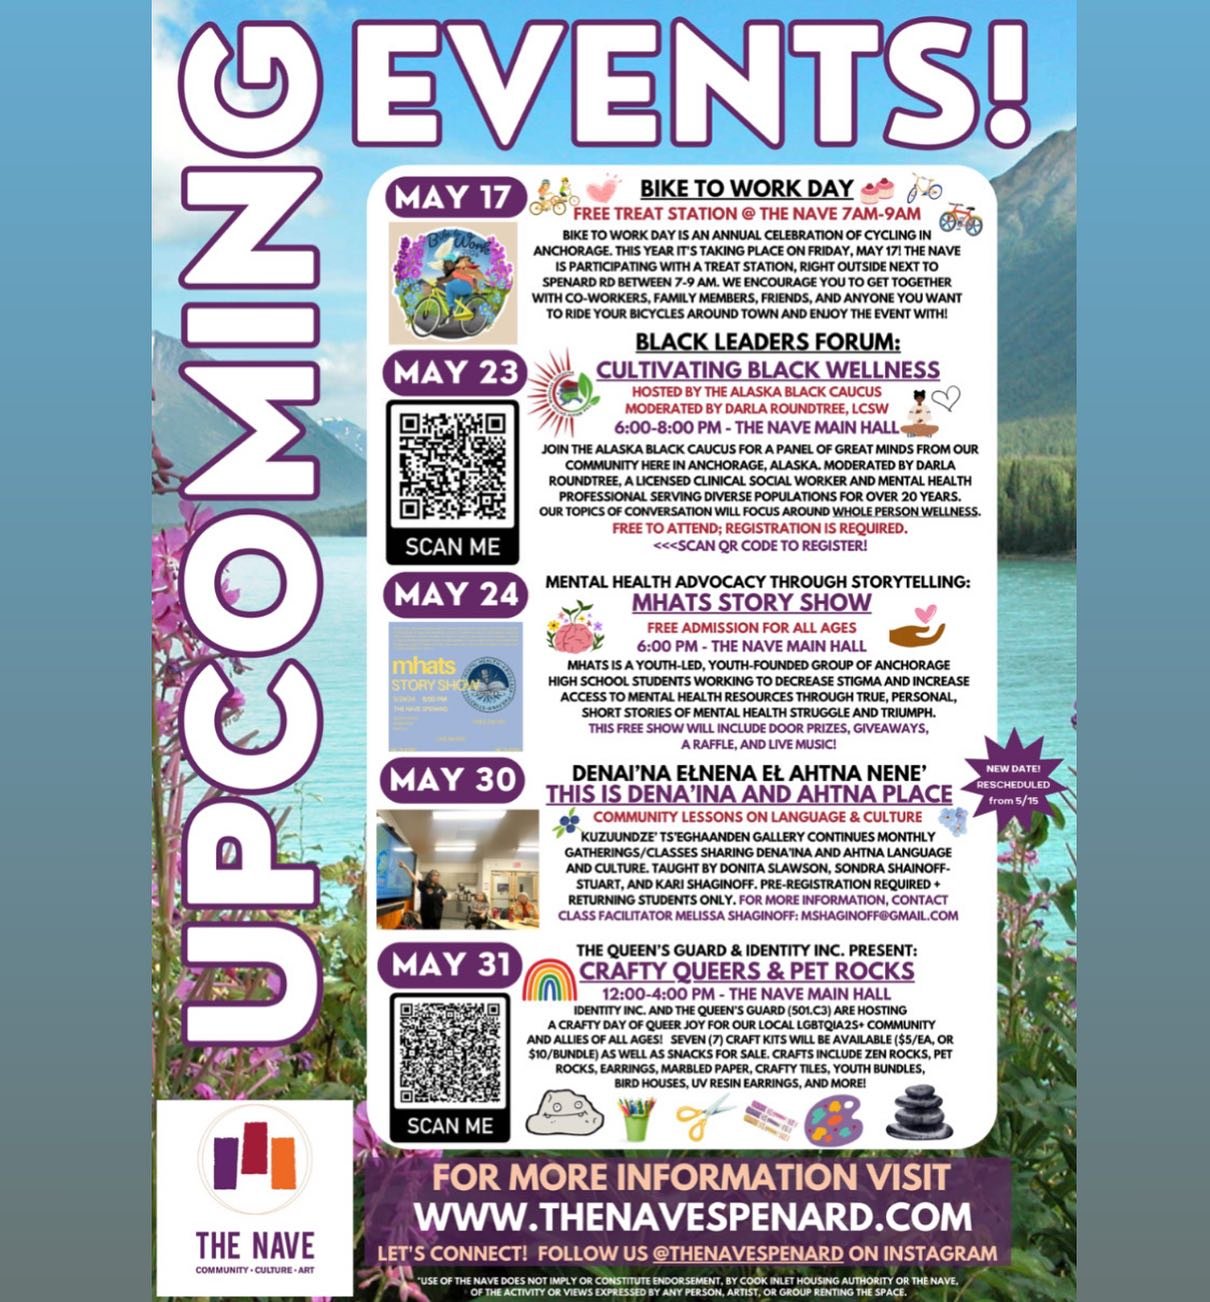 So many exciting activities coming up at The Nave in Spenard! Visit our website for a closer look at some of the Upcoming Events here in May. 🌷🌿🌼 
#LinkInBio #UpcomingEvents #weloveSpenard